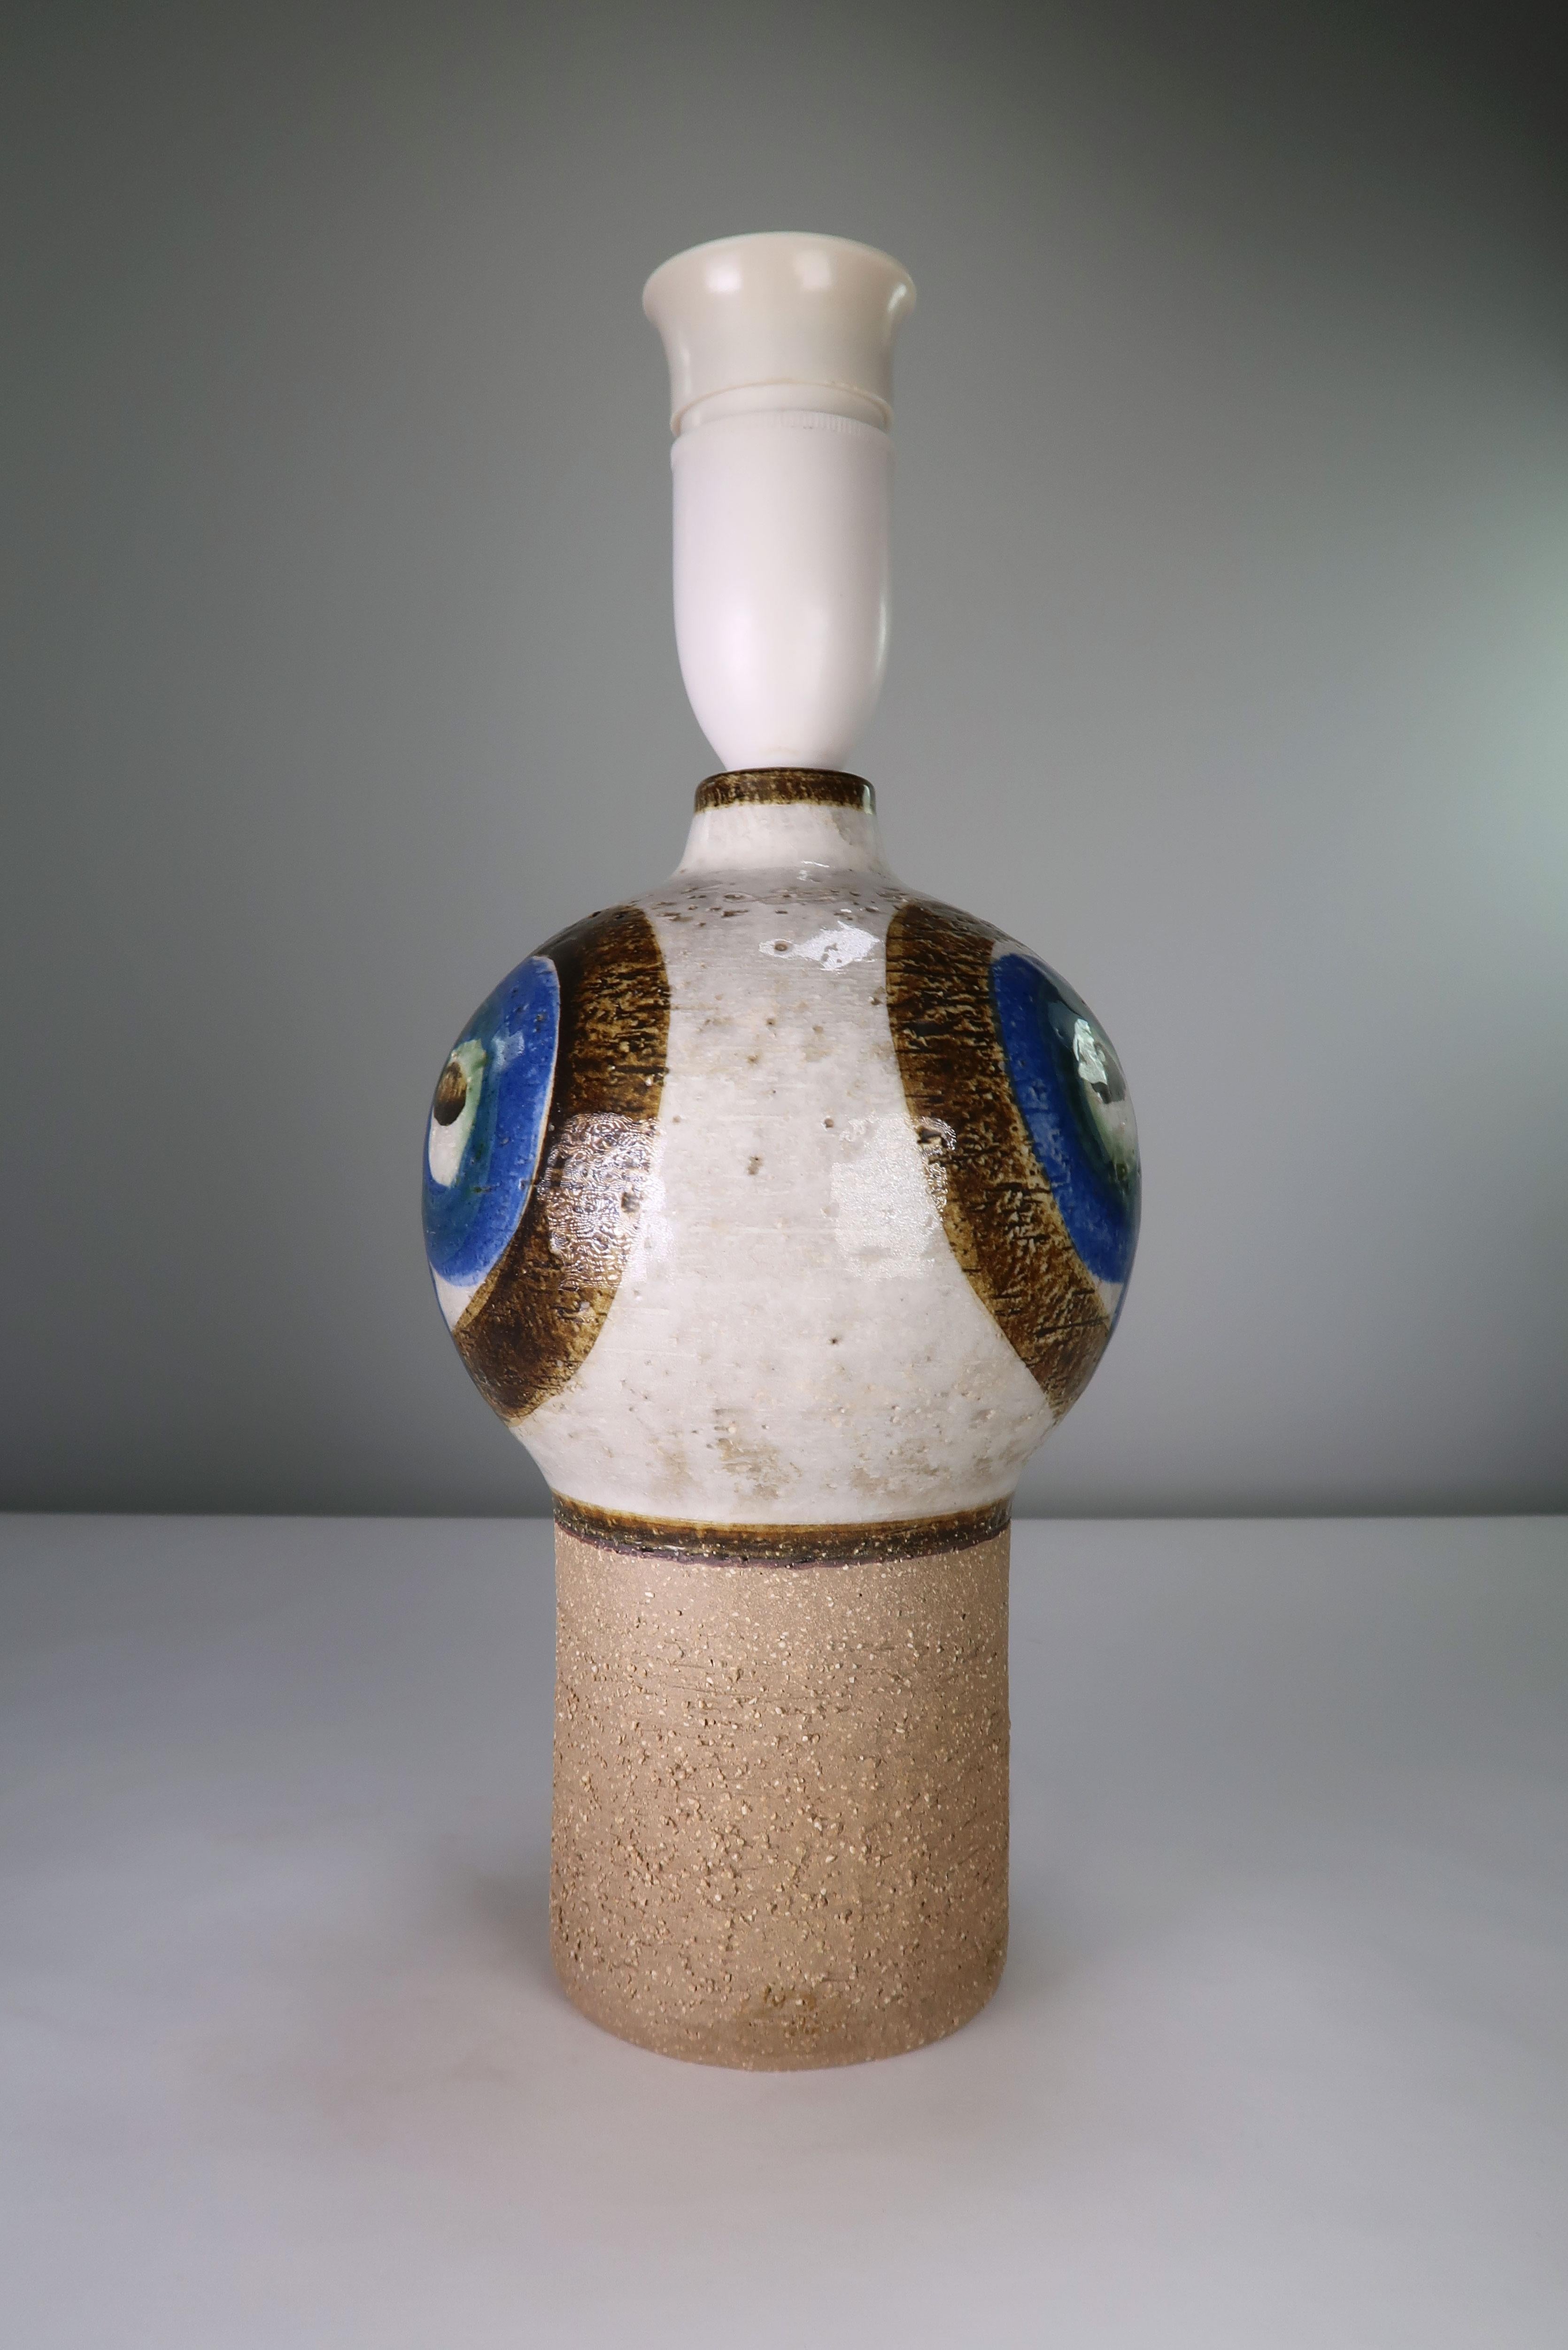 Danish mid-century modern stoneware table lamp shaped by Poul Brandborg and decorated by artist Noomi Backhausen. Manufactured for Søholm Keramik on the island of Bornholm in 1969. Raw body with glazed globe in blue, green, brown and beige colors